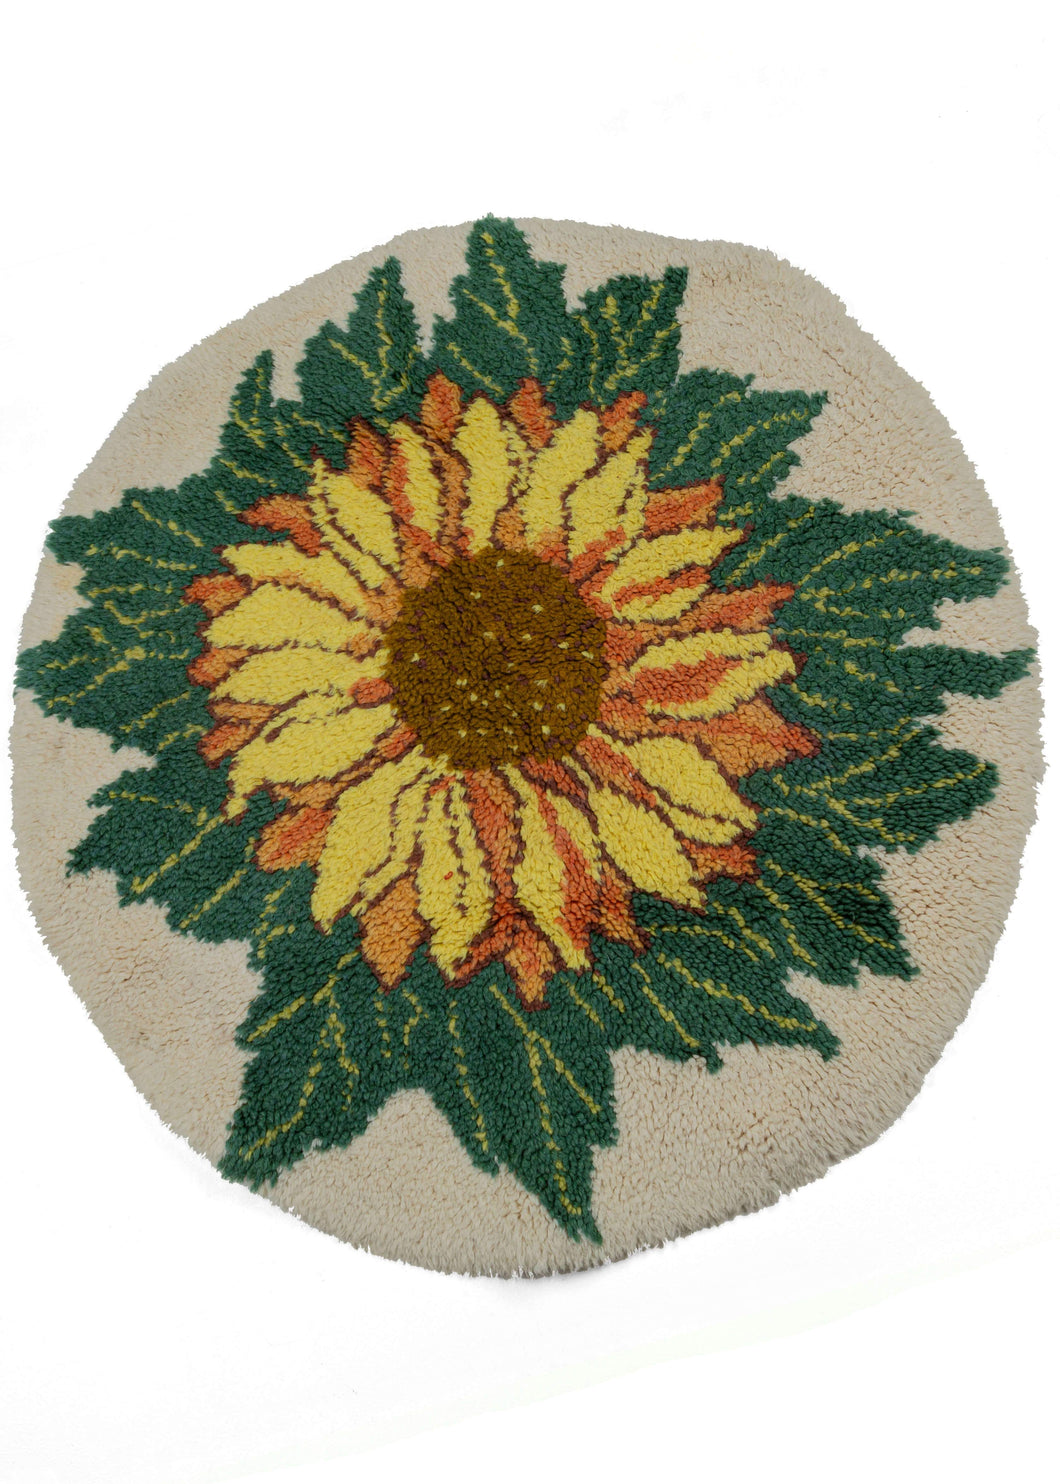 Vintage Latch Hook Sunflower rug that features a top view of a lively sunflower in tones of yellow, oranges and browns atop abundant green leaves and a cream base. The rug is crafted in a hard to find circle which accentuates the roundness of the flower.